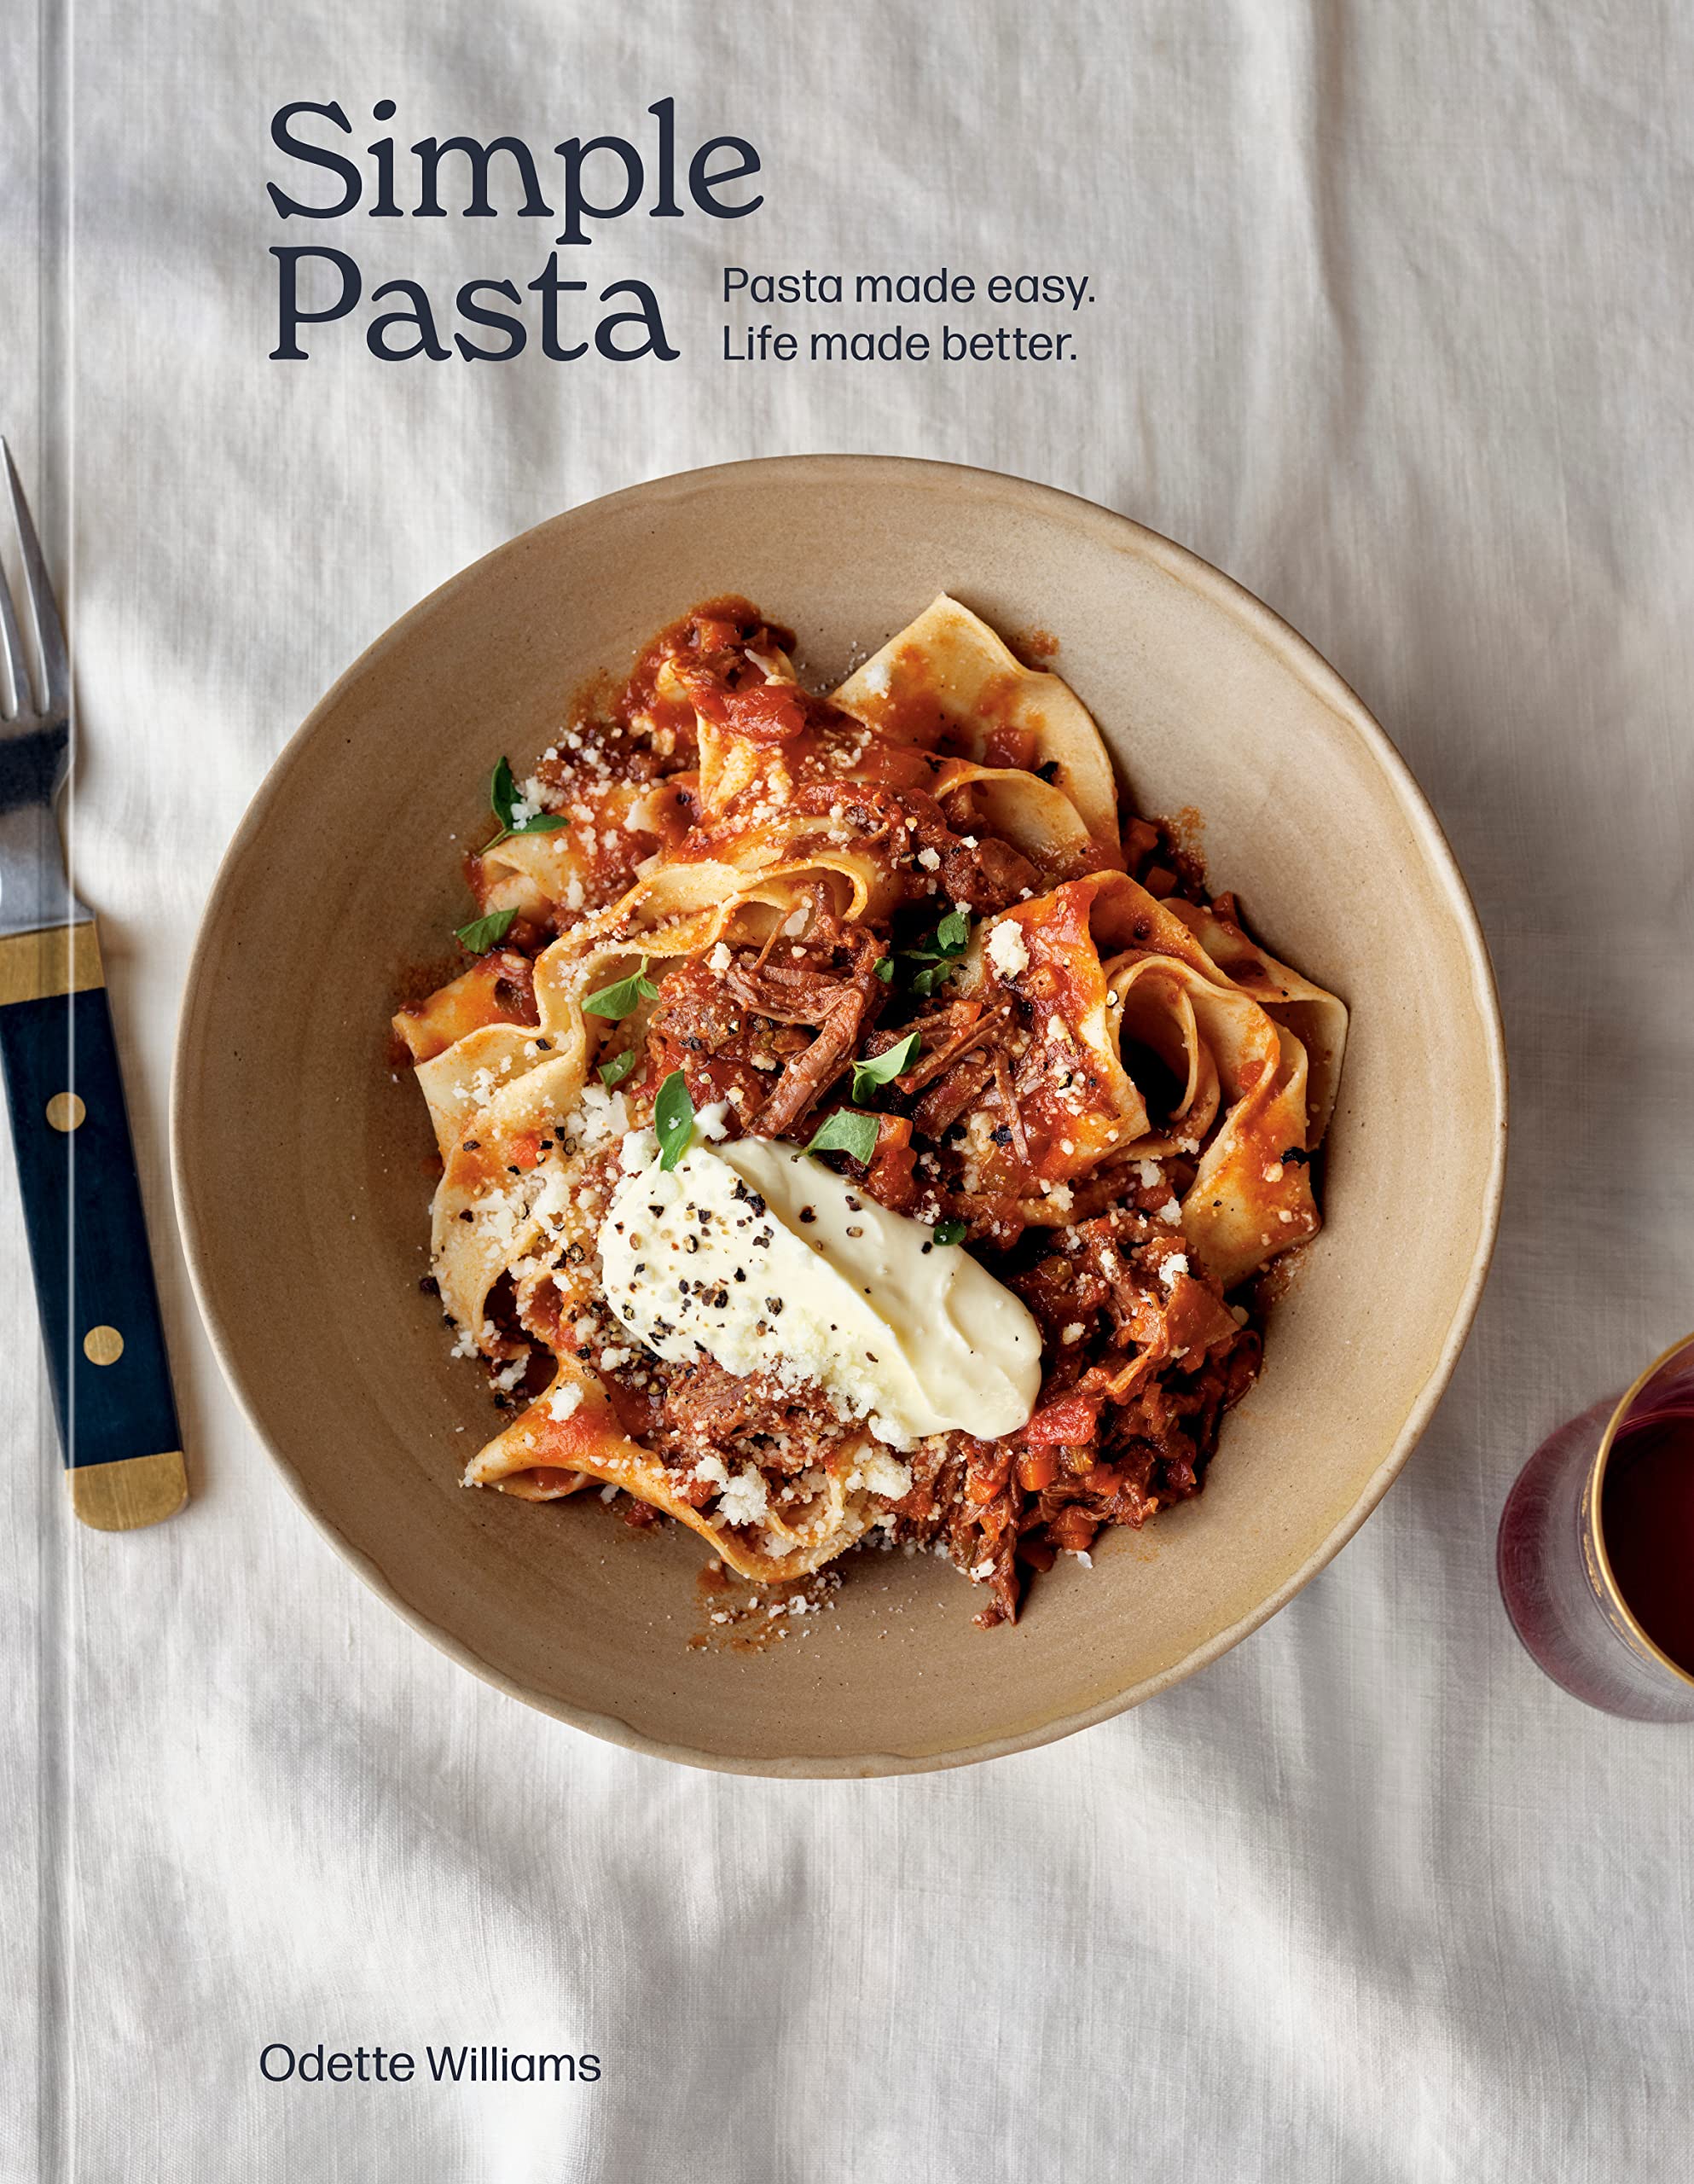 Simple Pasta: Pasta Made Easy. Life Made Better (Odette Williams)